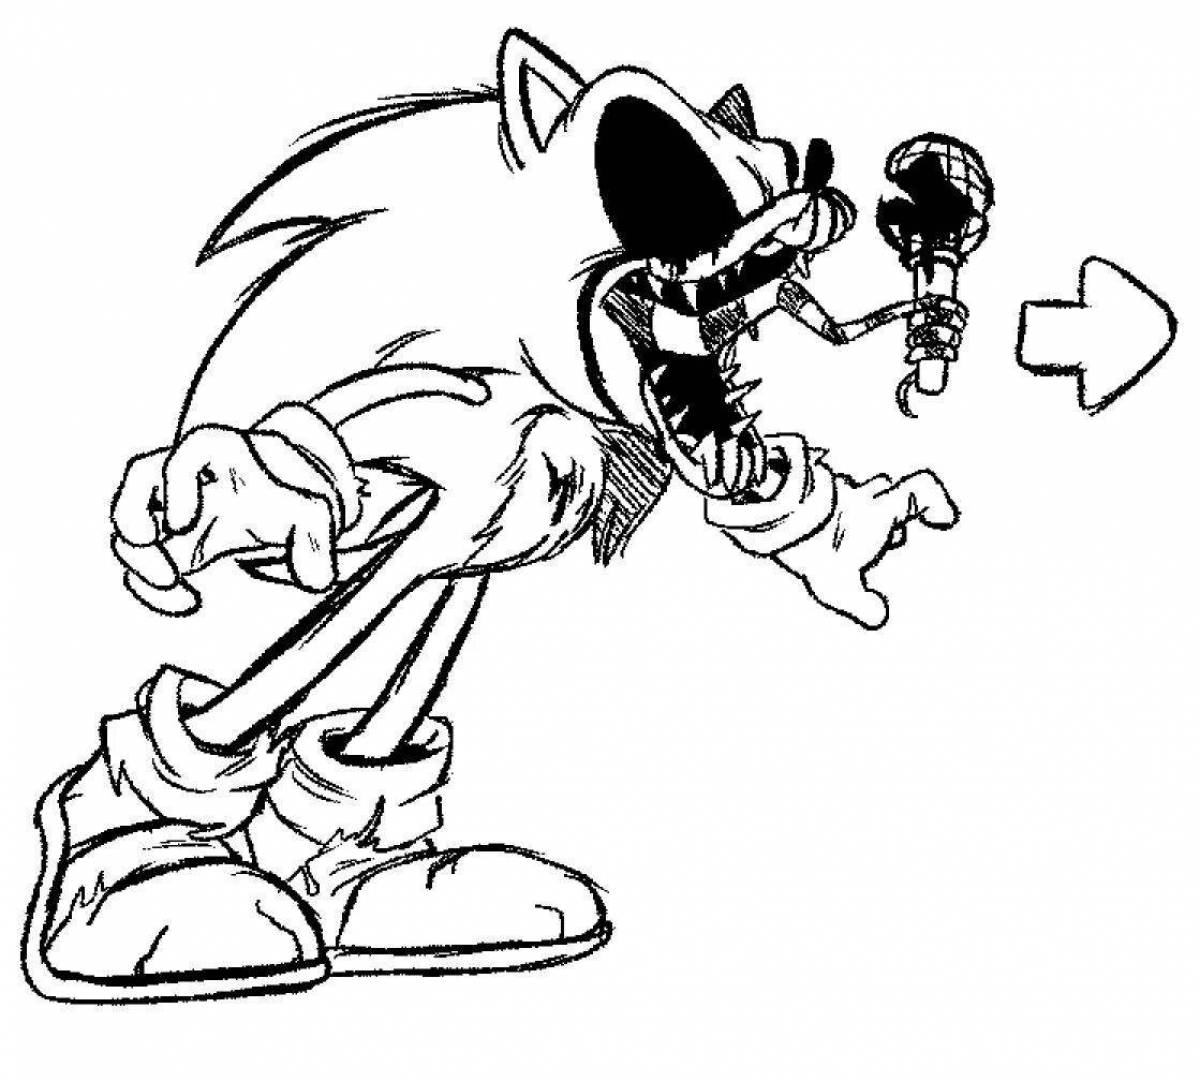 Evil sonic coloring page - disgusting